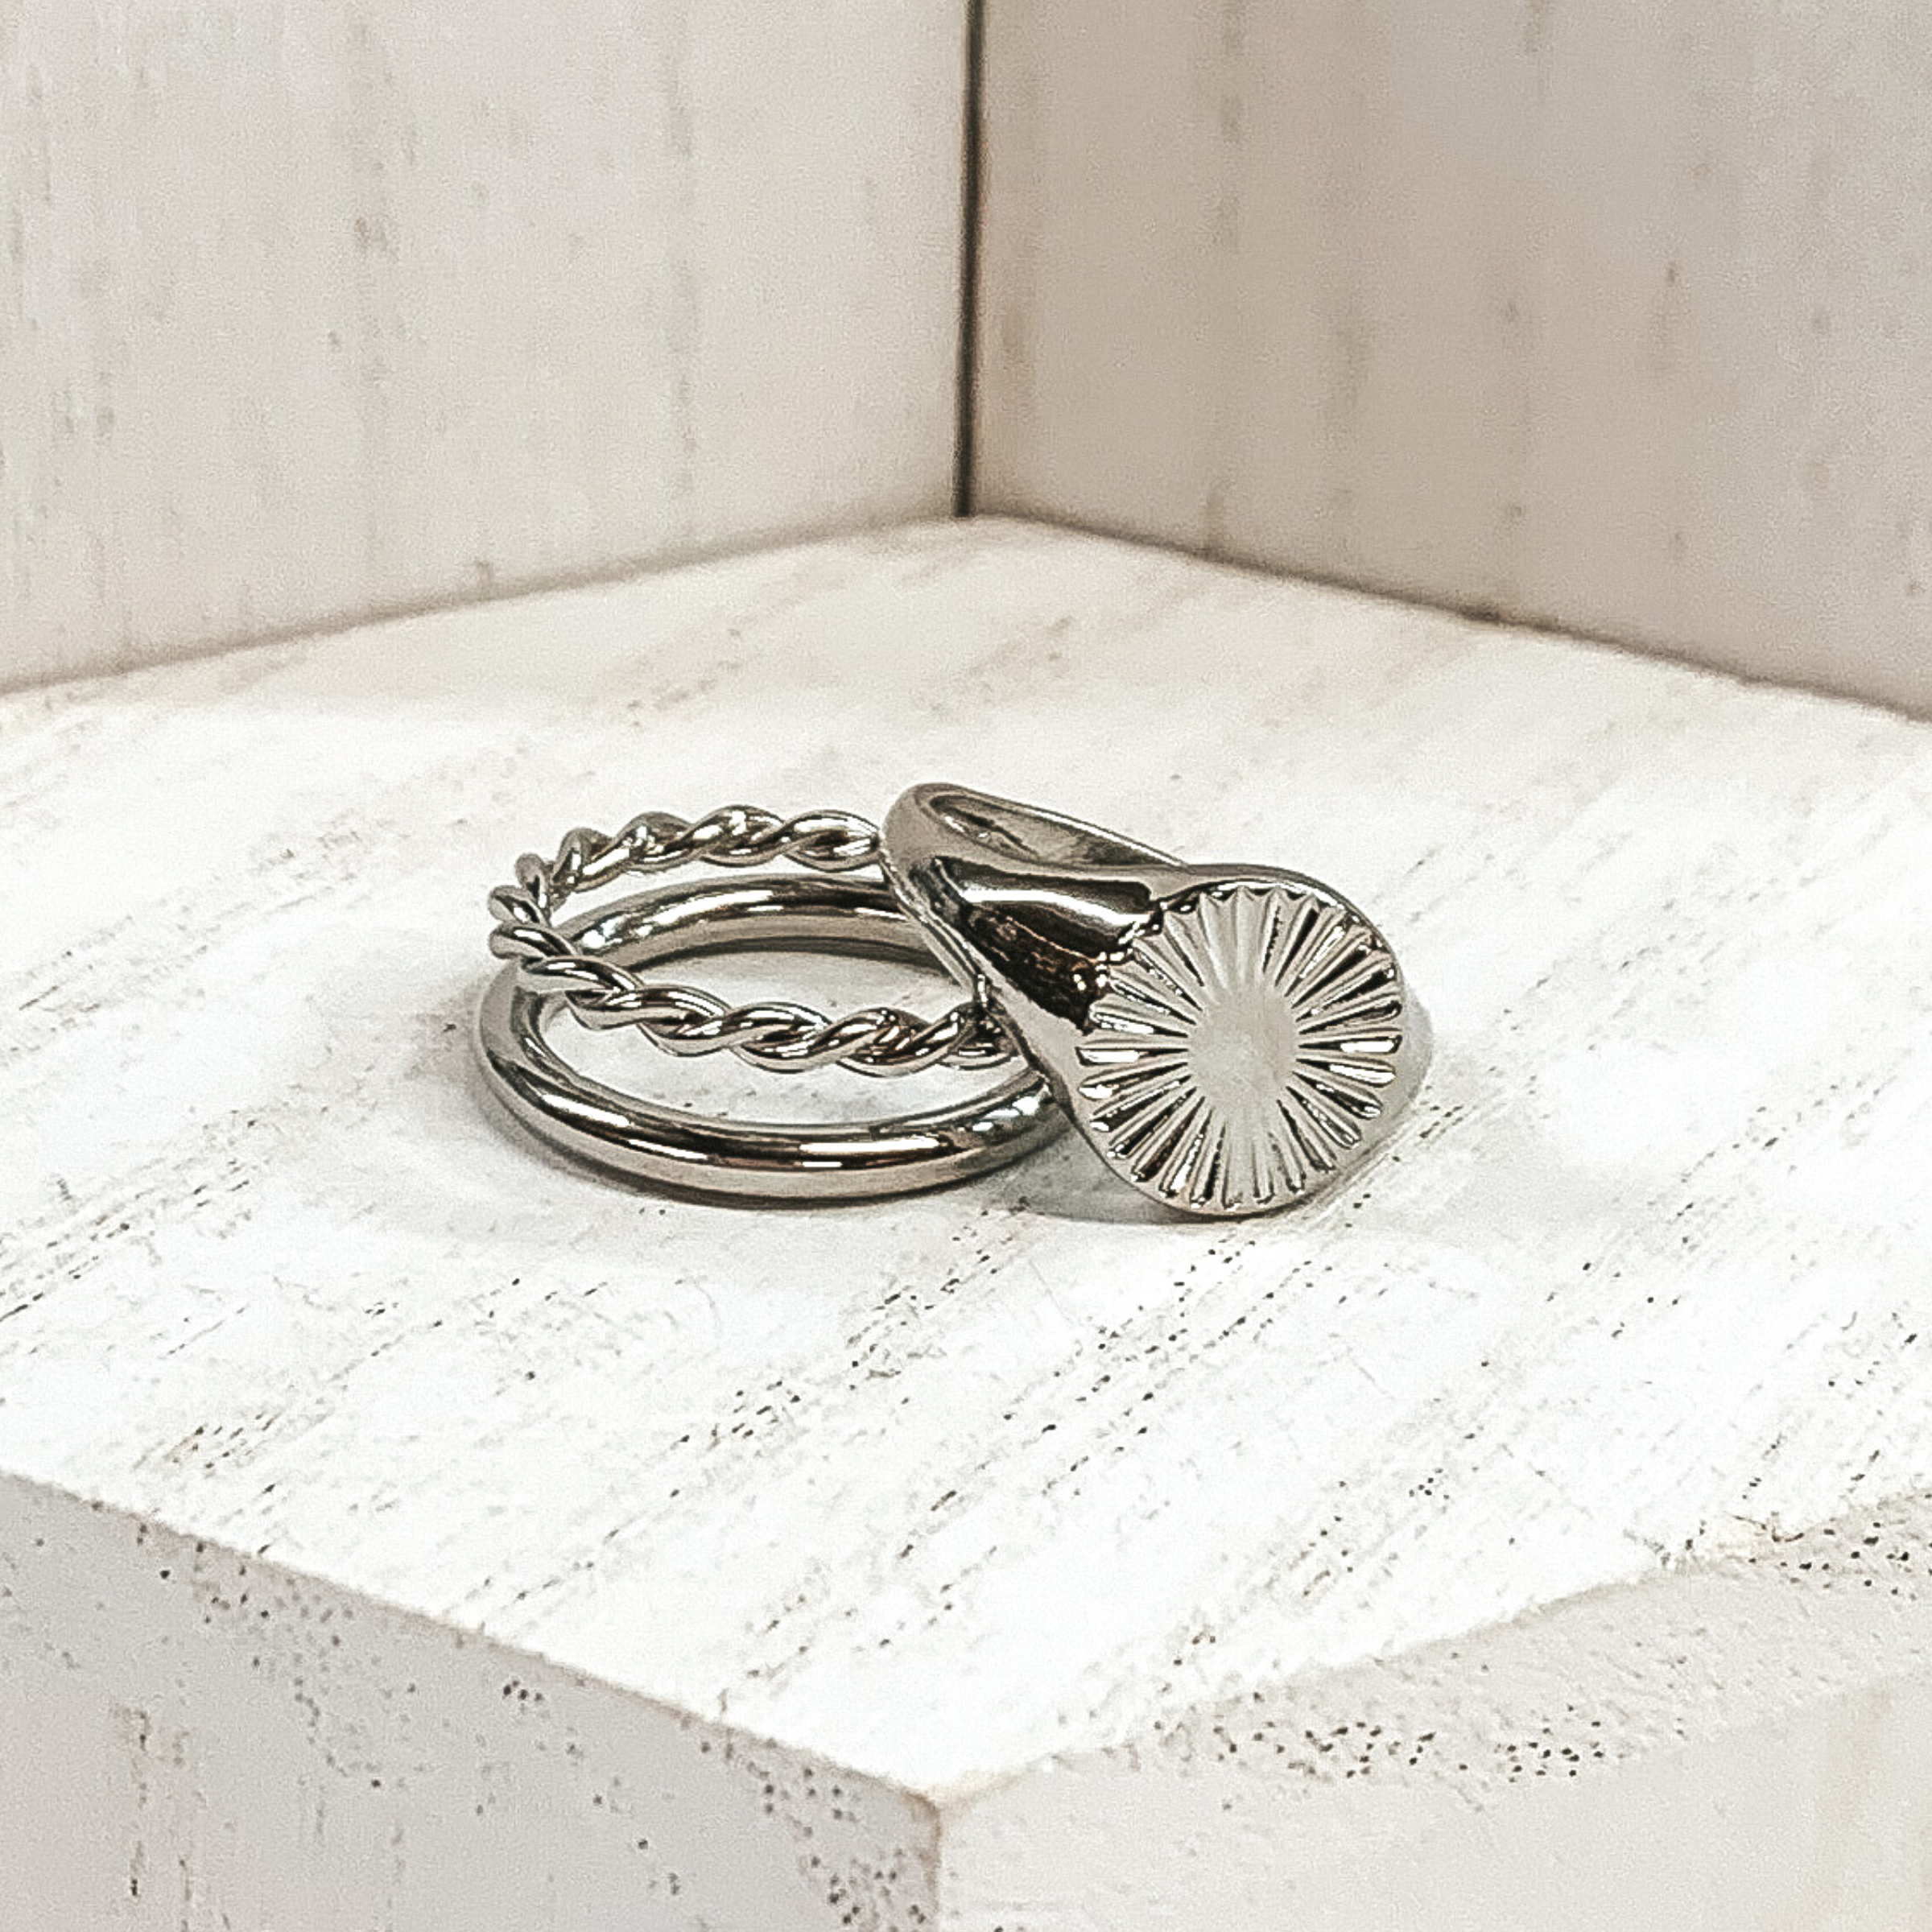 Both rings are silver in color.  The double ring has one plain band and one twisted band. The ring that is leaning on it has a circle pendant with a starburst design on it. These rings are pictured on a white background.